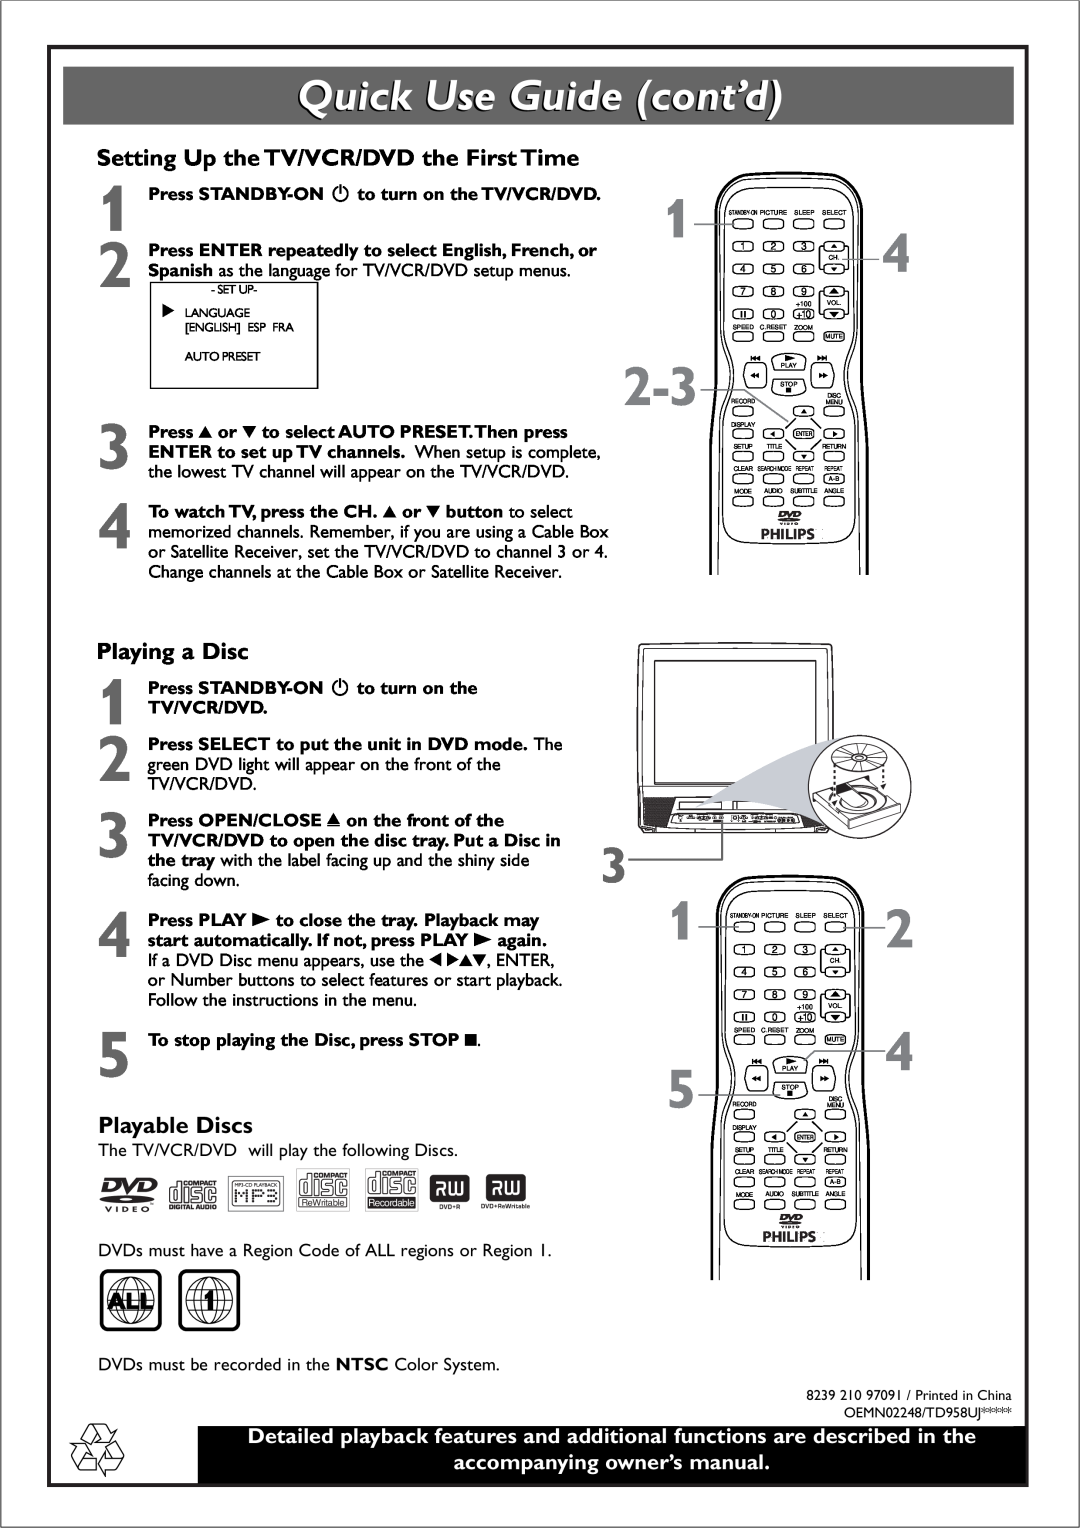 Philips 27DVCR55 manual Quick Use Guide cont’d, Setting Up the TV/VCR/DVD the First Time, Playing a Disc, Playable Discs 